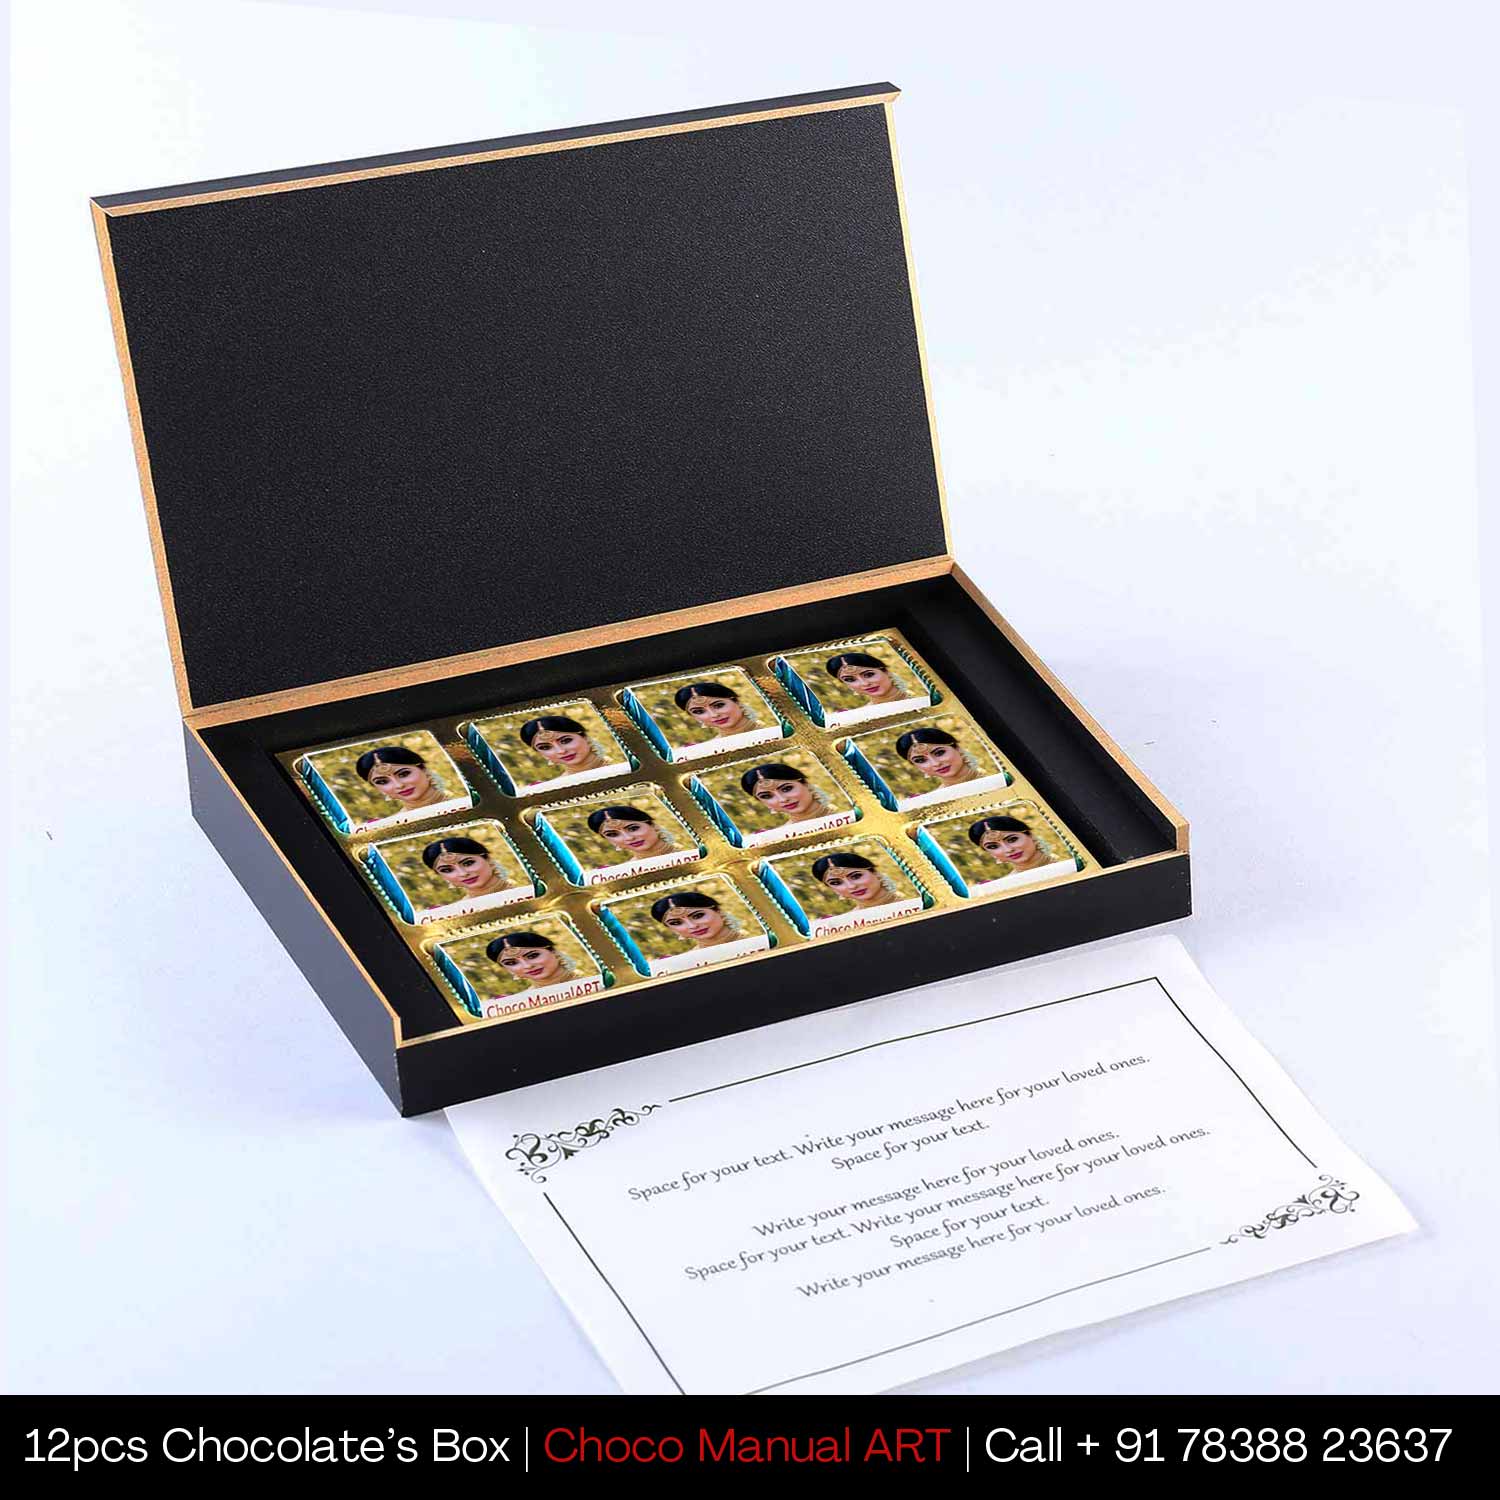 Sorry gift for girlfriend love I Personalised chocolate box with photo printed